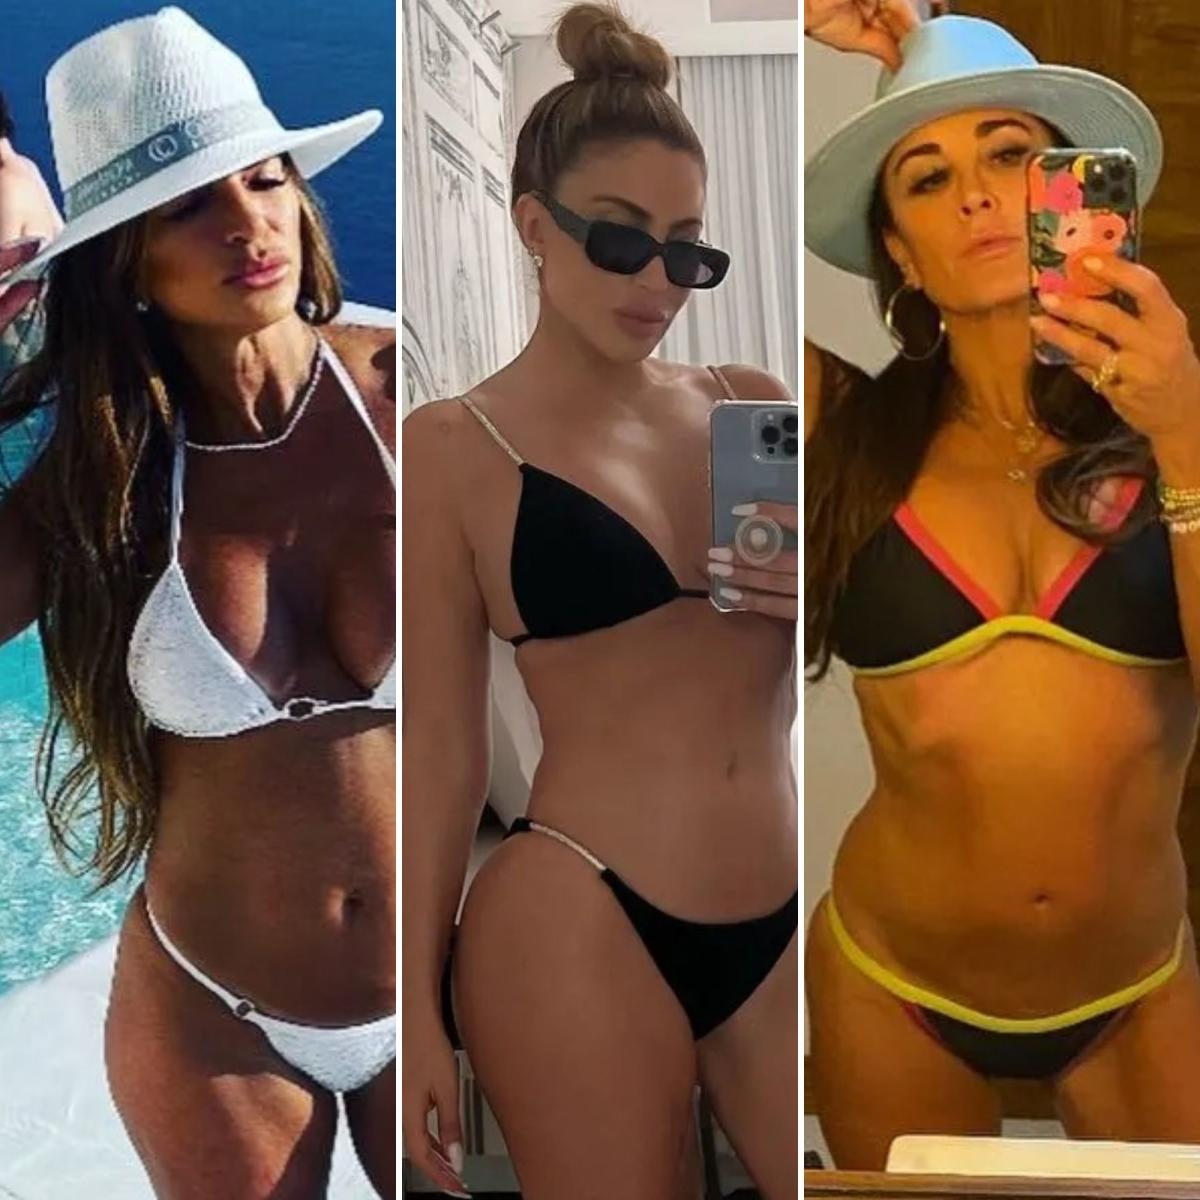 These Real Housewives Stars Are Seriously Hot See Their Best Bikini Moments Over the Years! photo